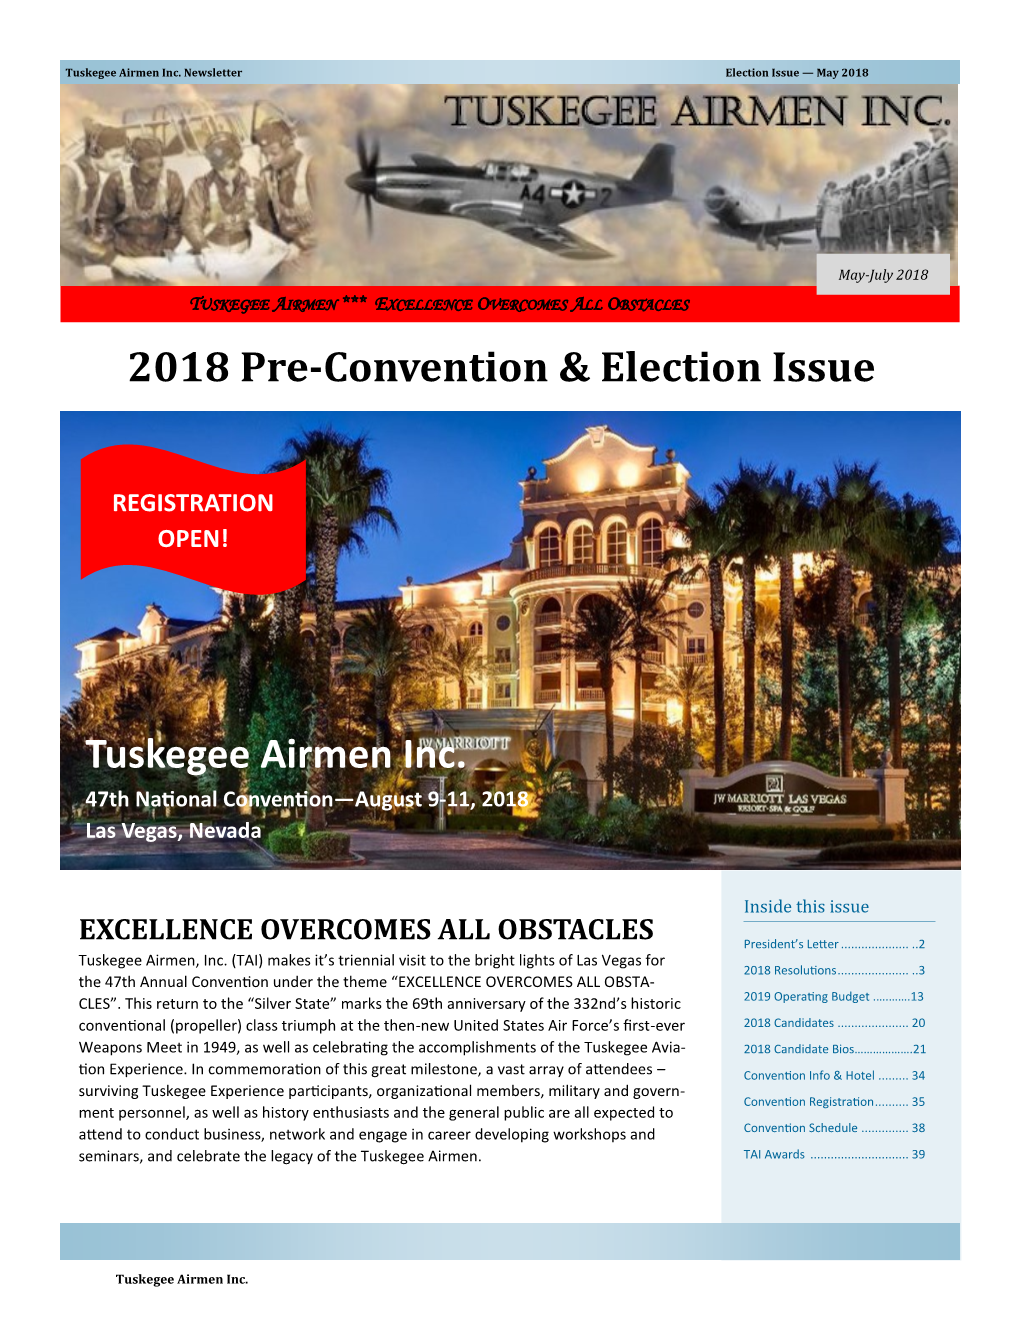 2018 Pre-Convention Newsletter